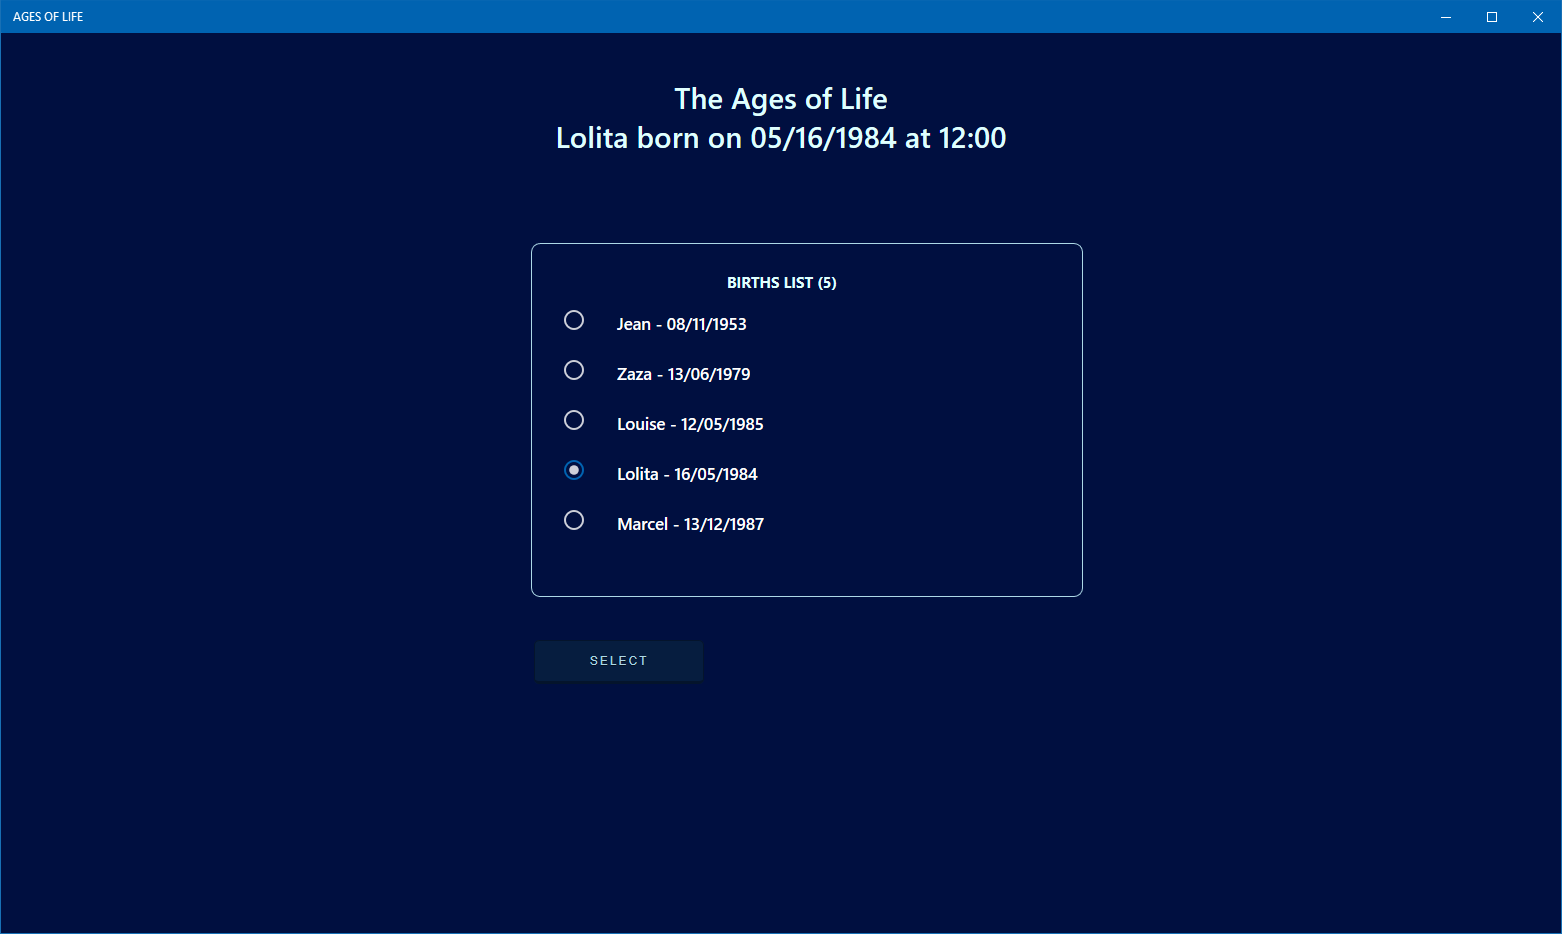 THE AGES OF LIFE